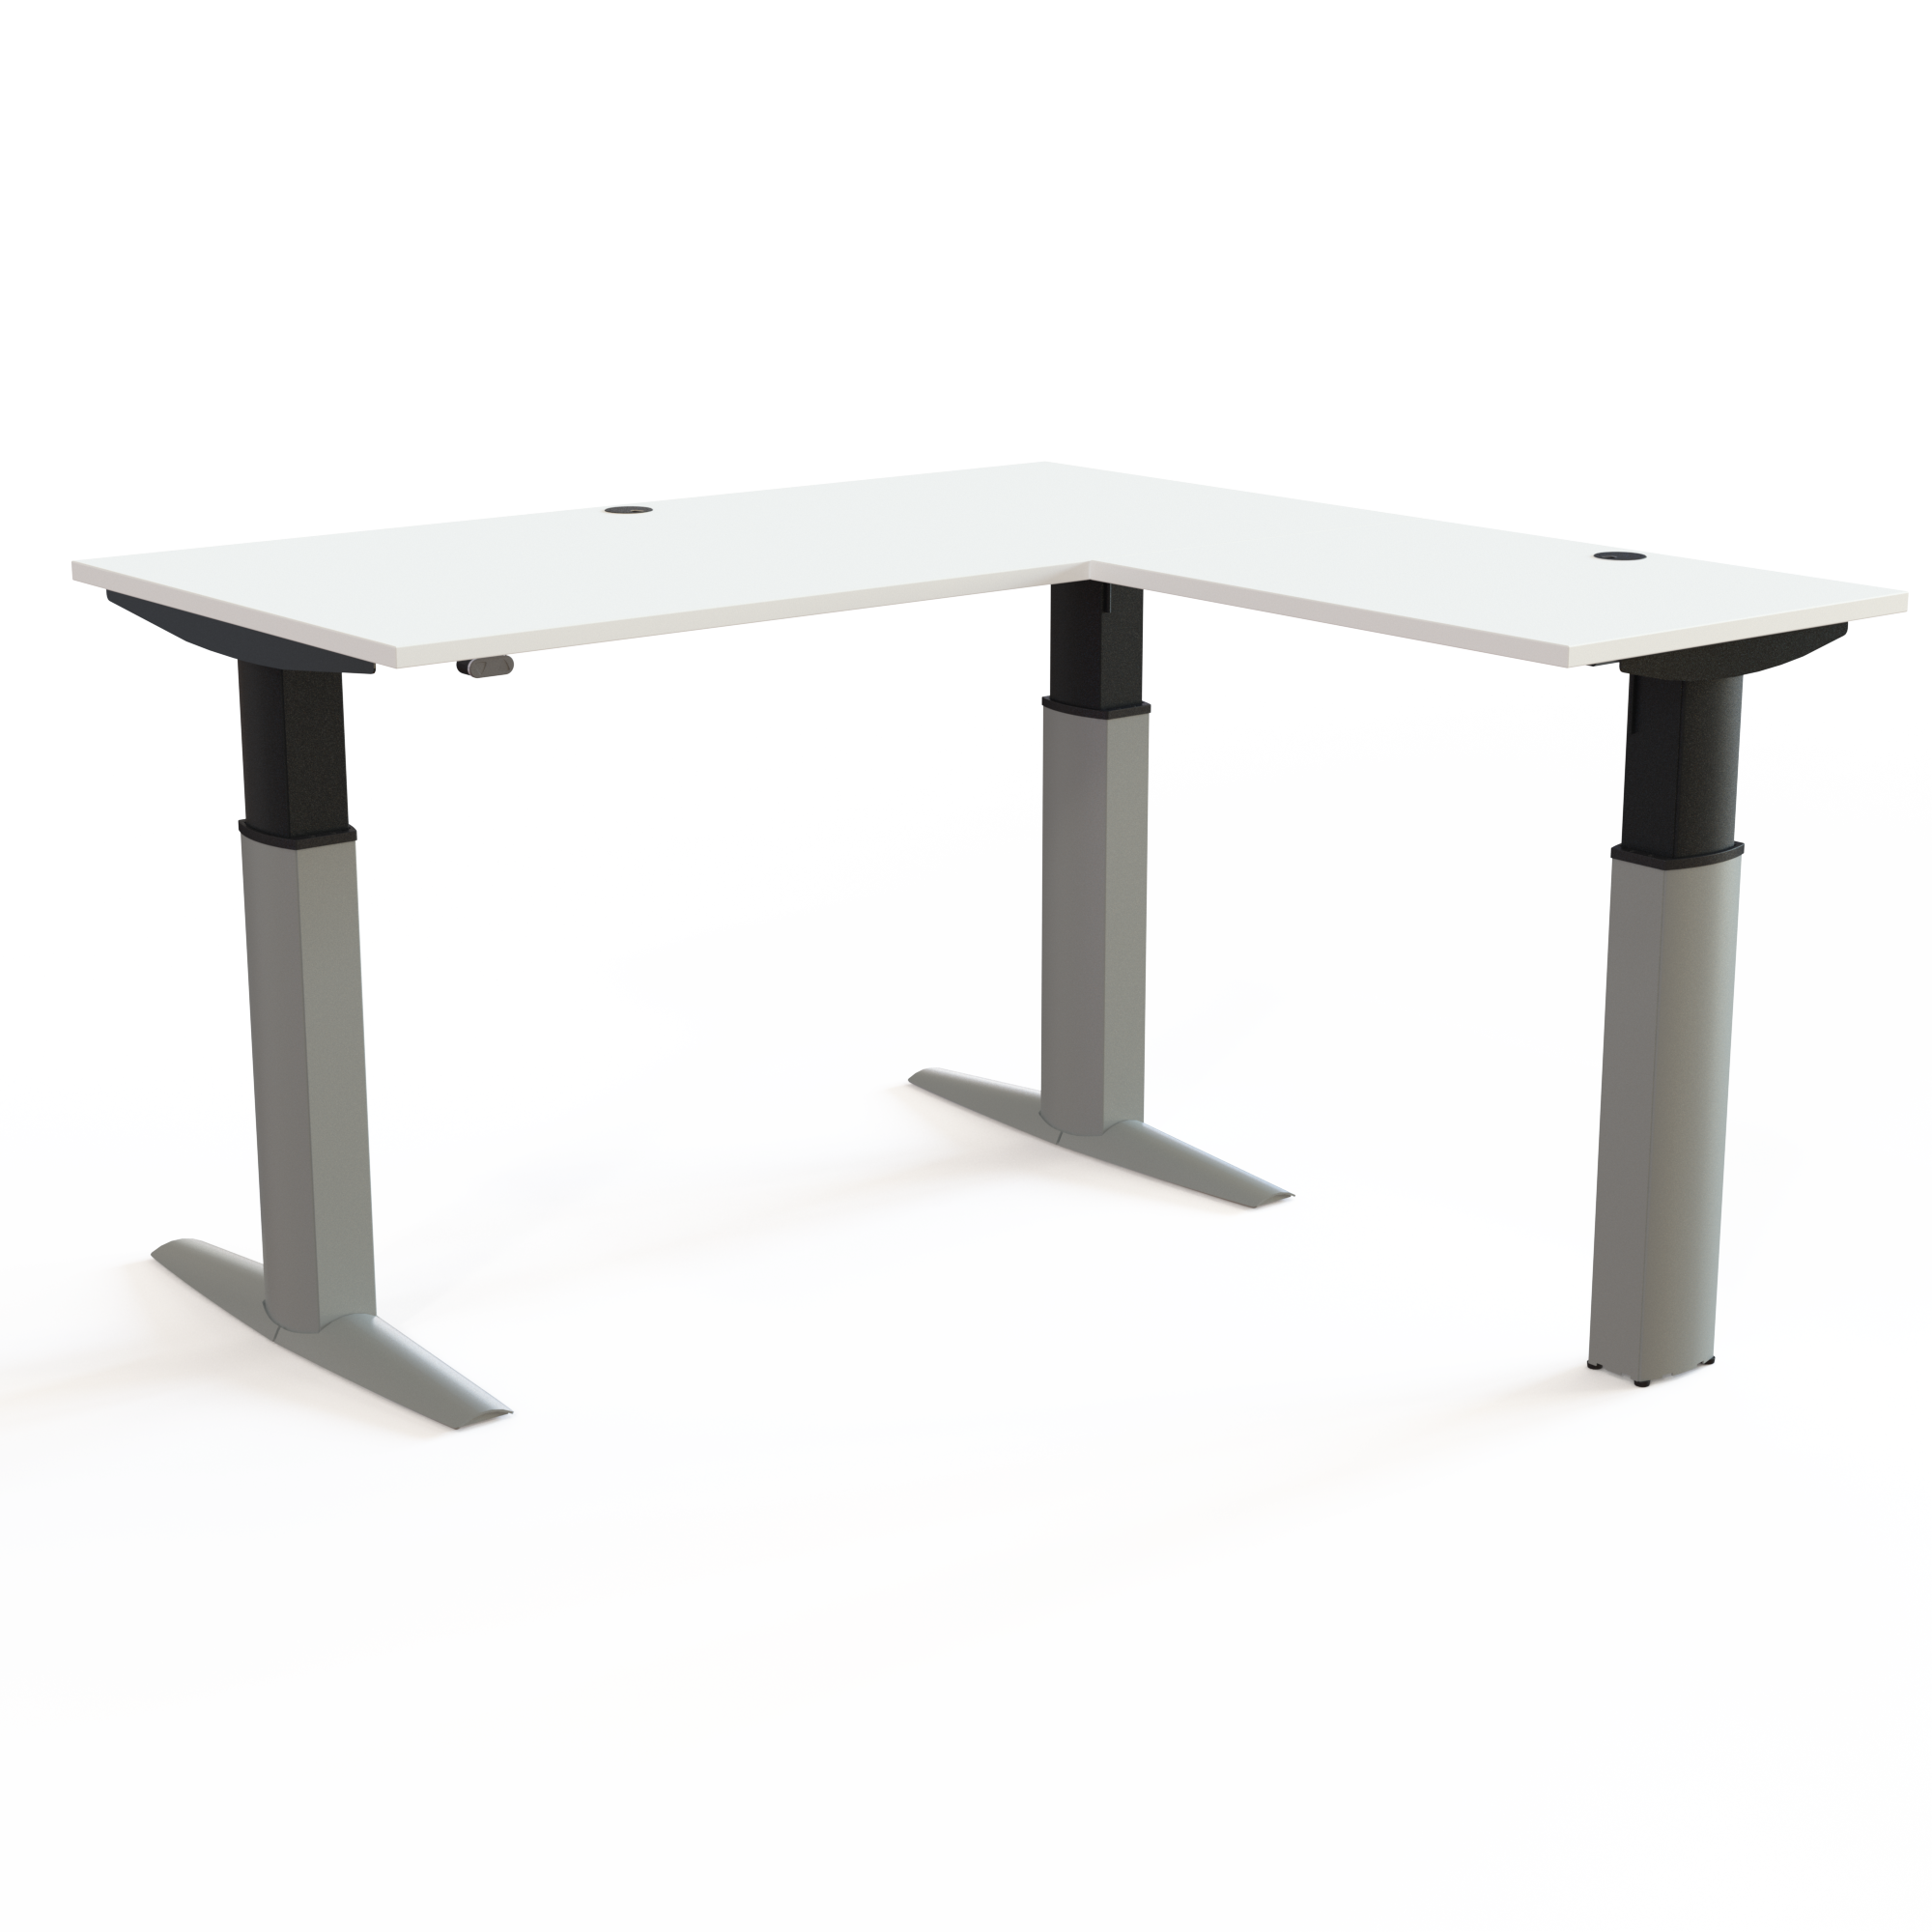 Electric Adjustable Desk | 160x160 cm | White with silver frame